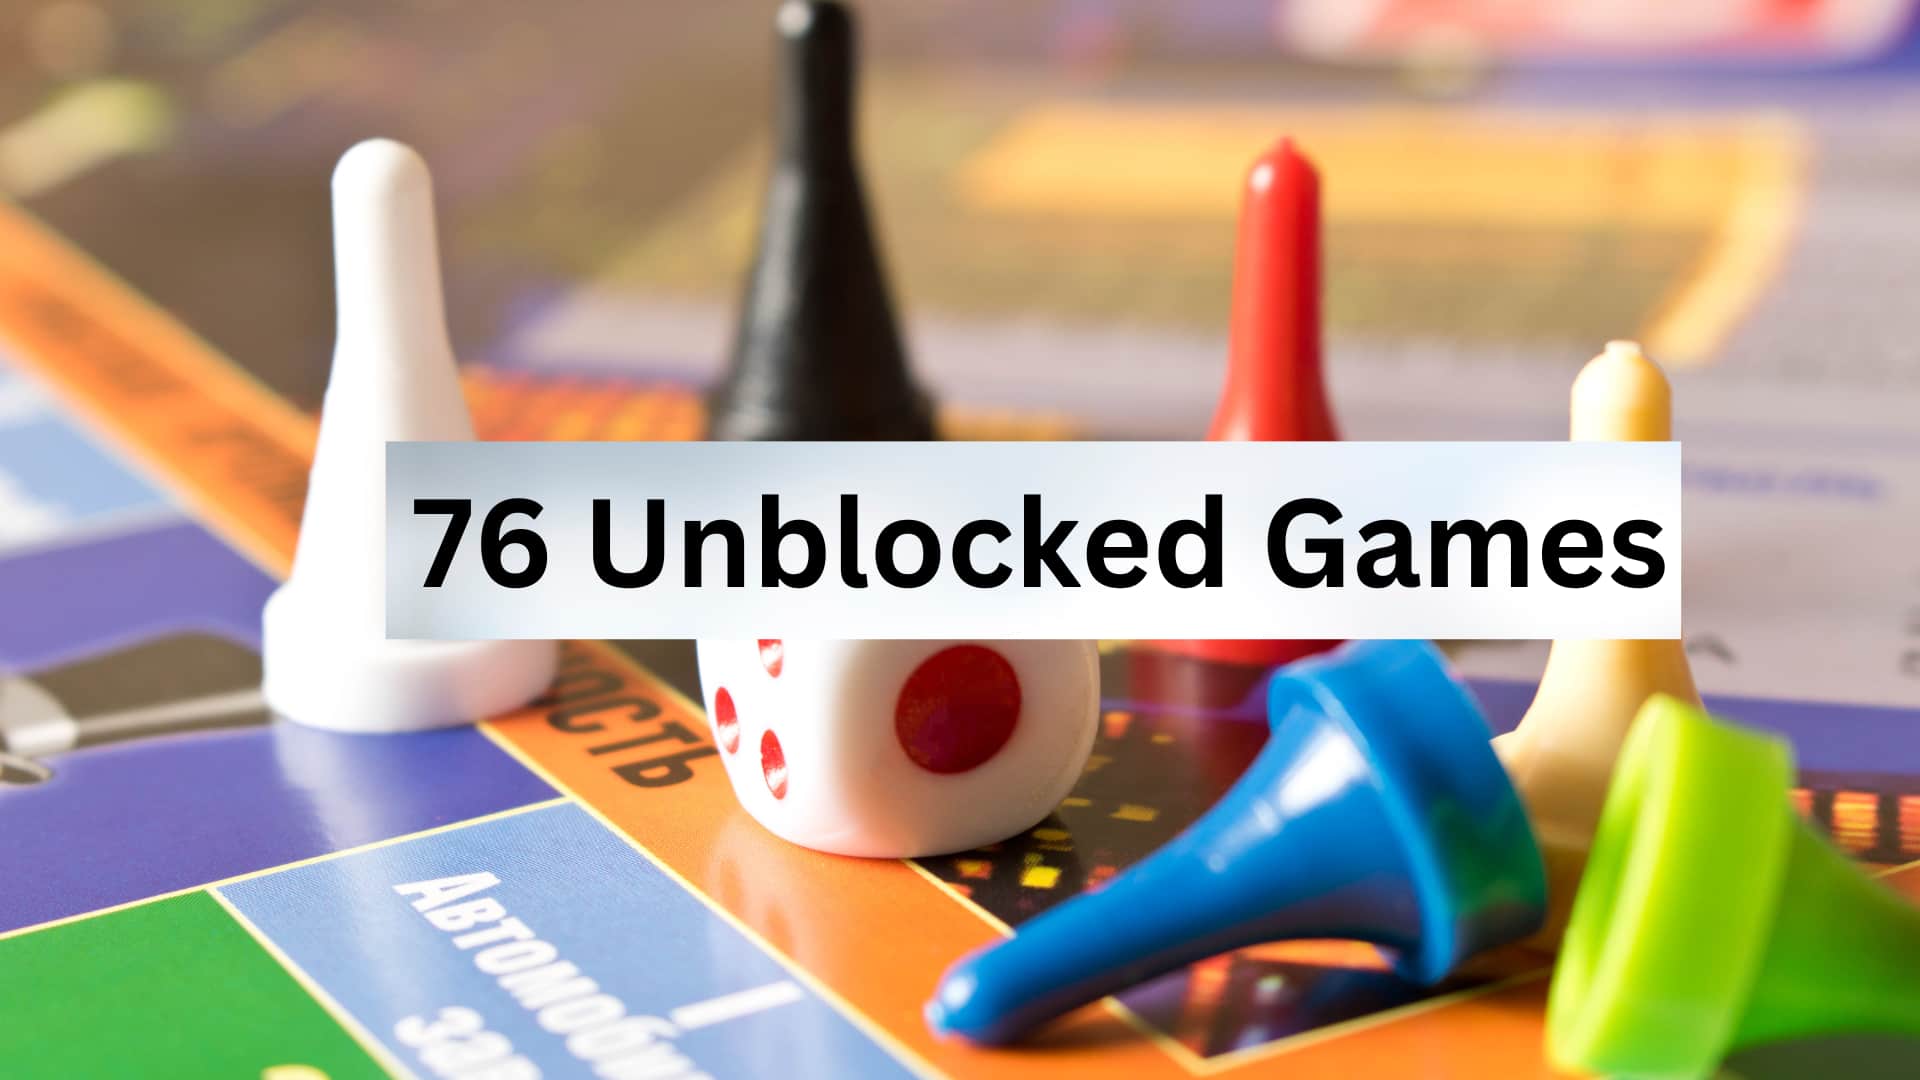 76 Unblocked Games